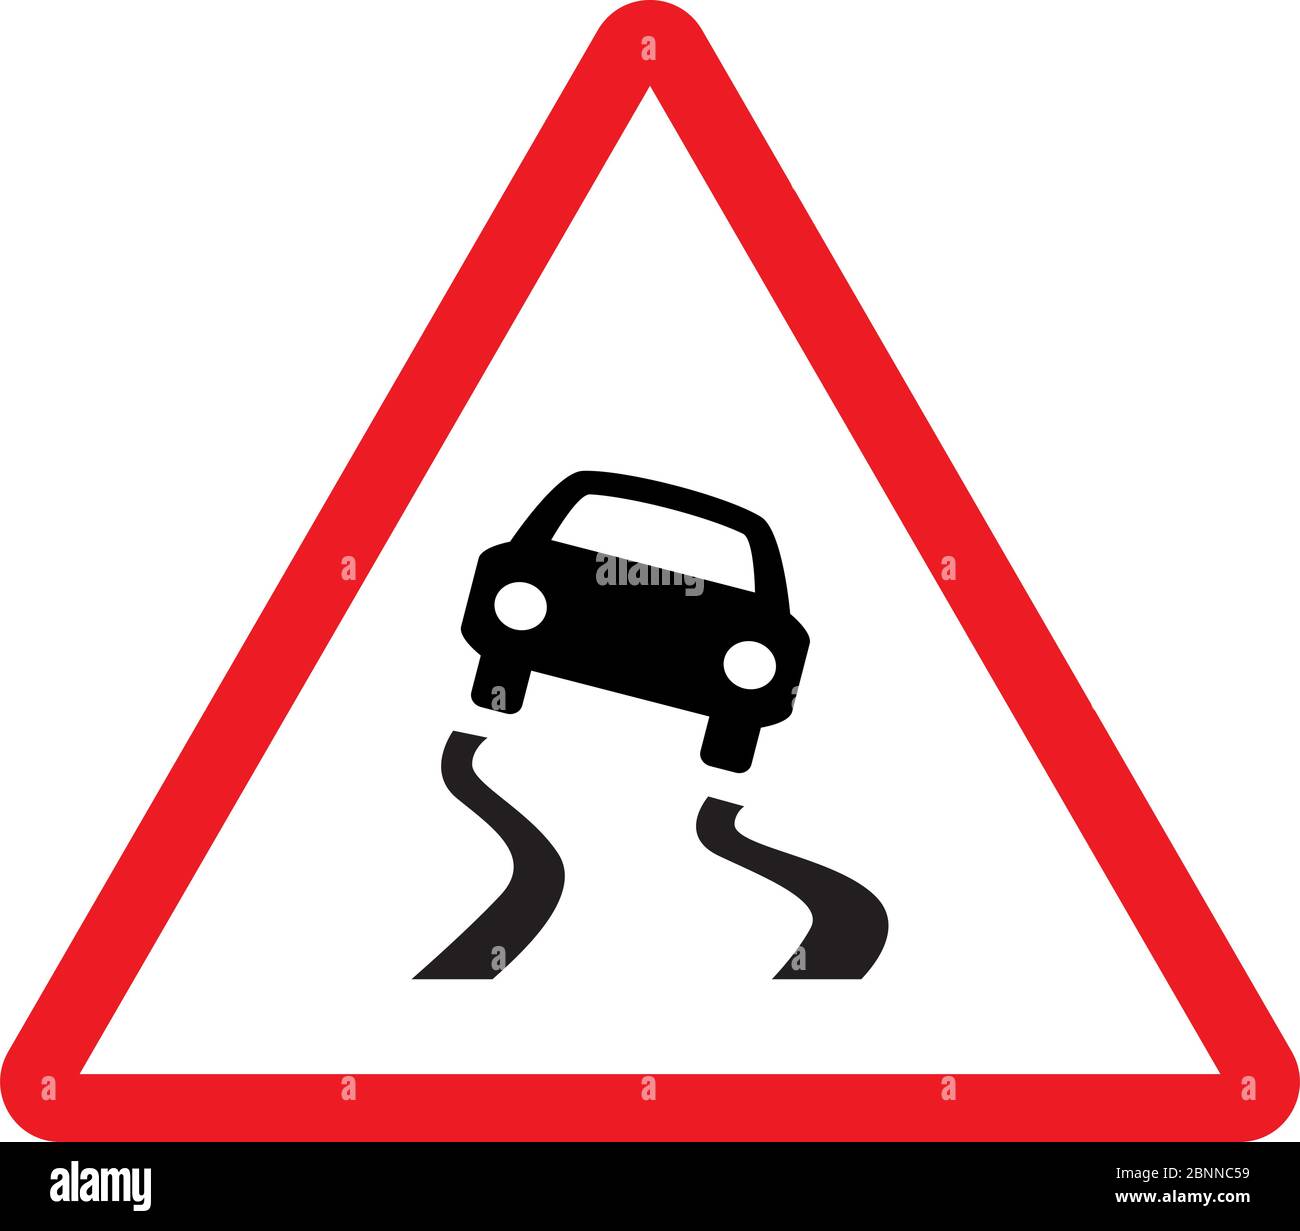 Slippery Road Sign Cut Out Stock Images & Pictures - Alamy